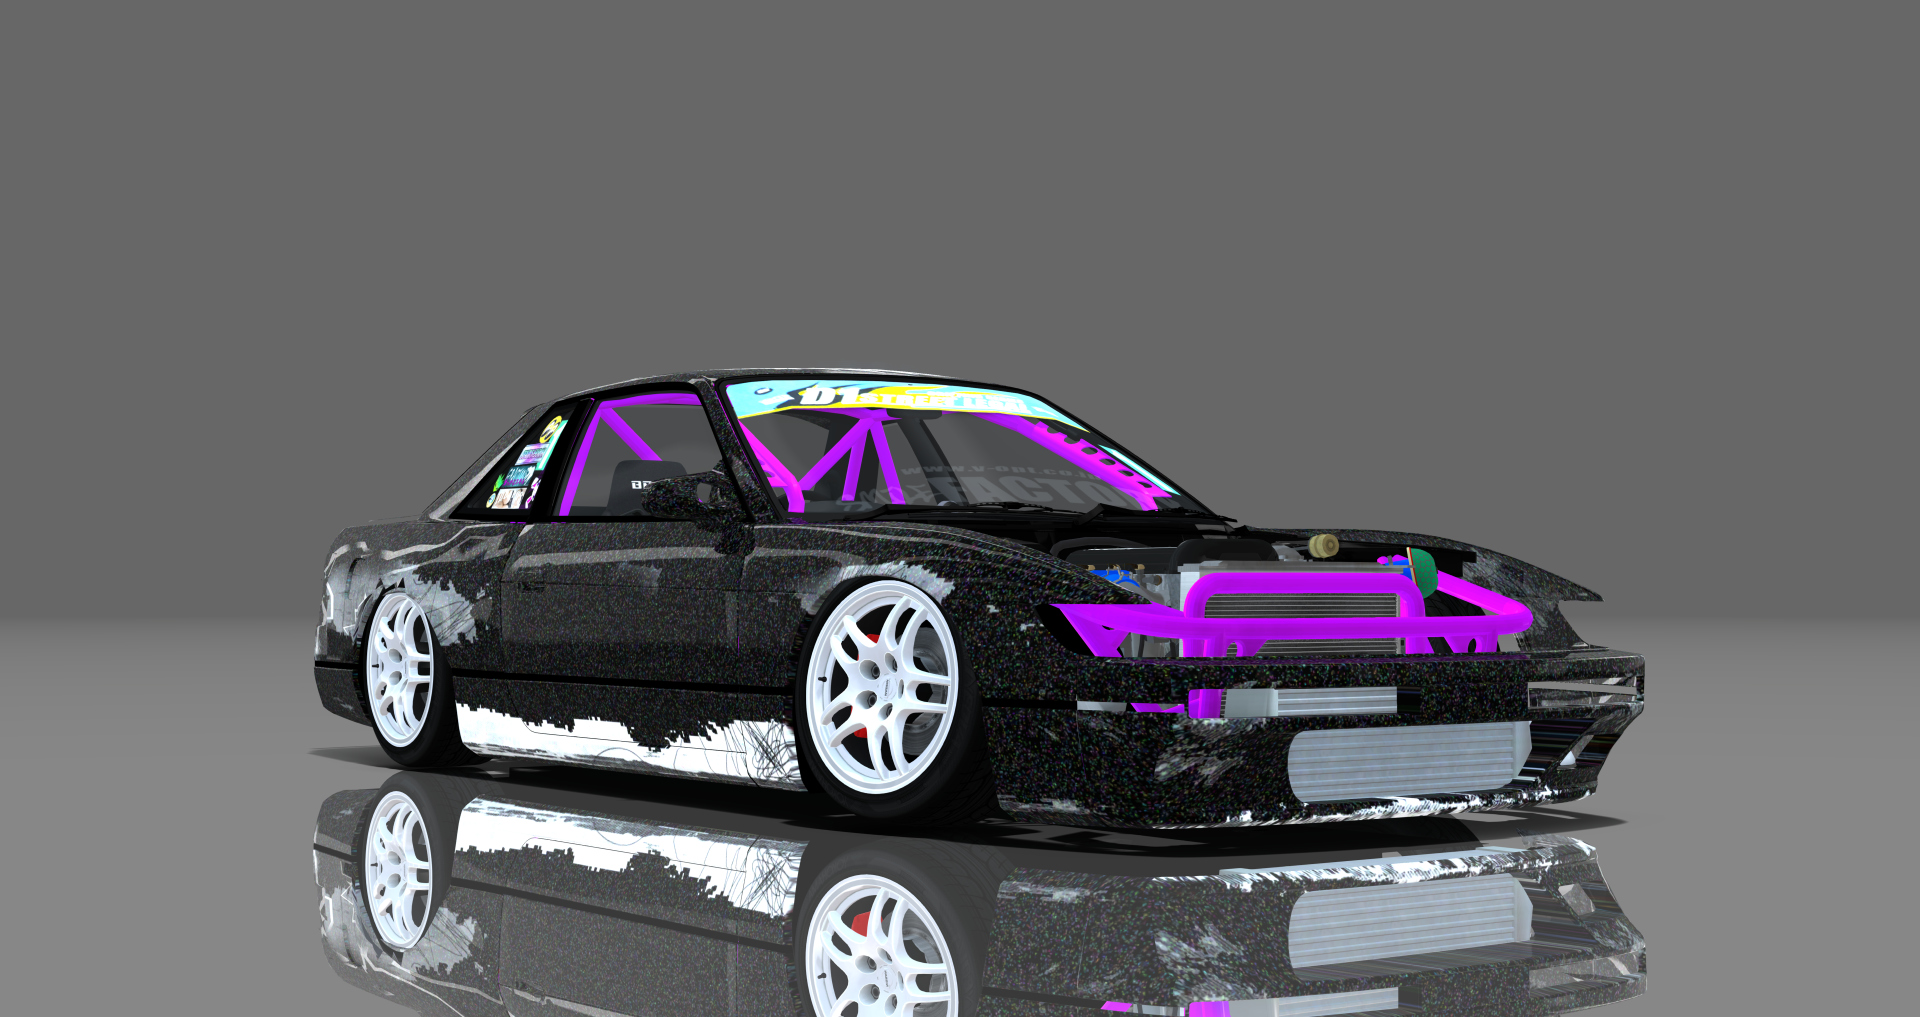 DTP Nissan Silvia S13 Missile Preview Image